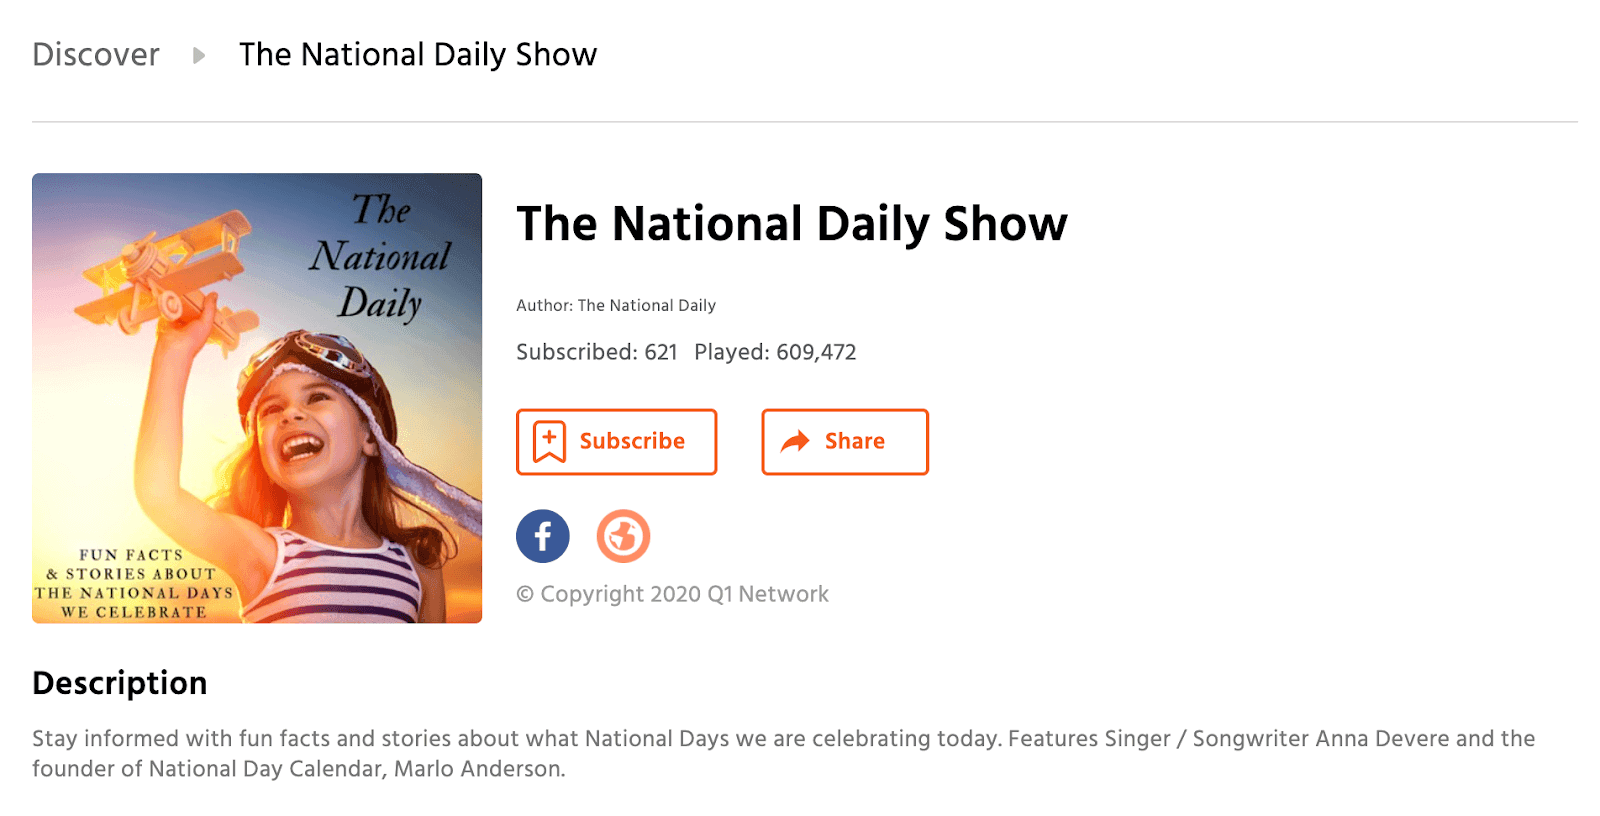 National Daily Show main page